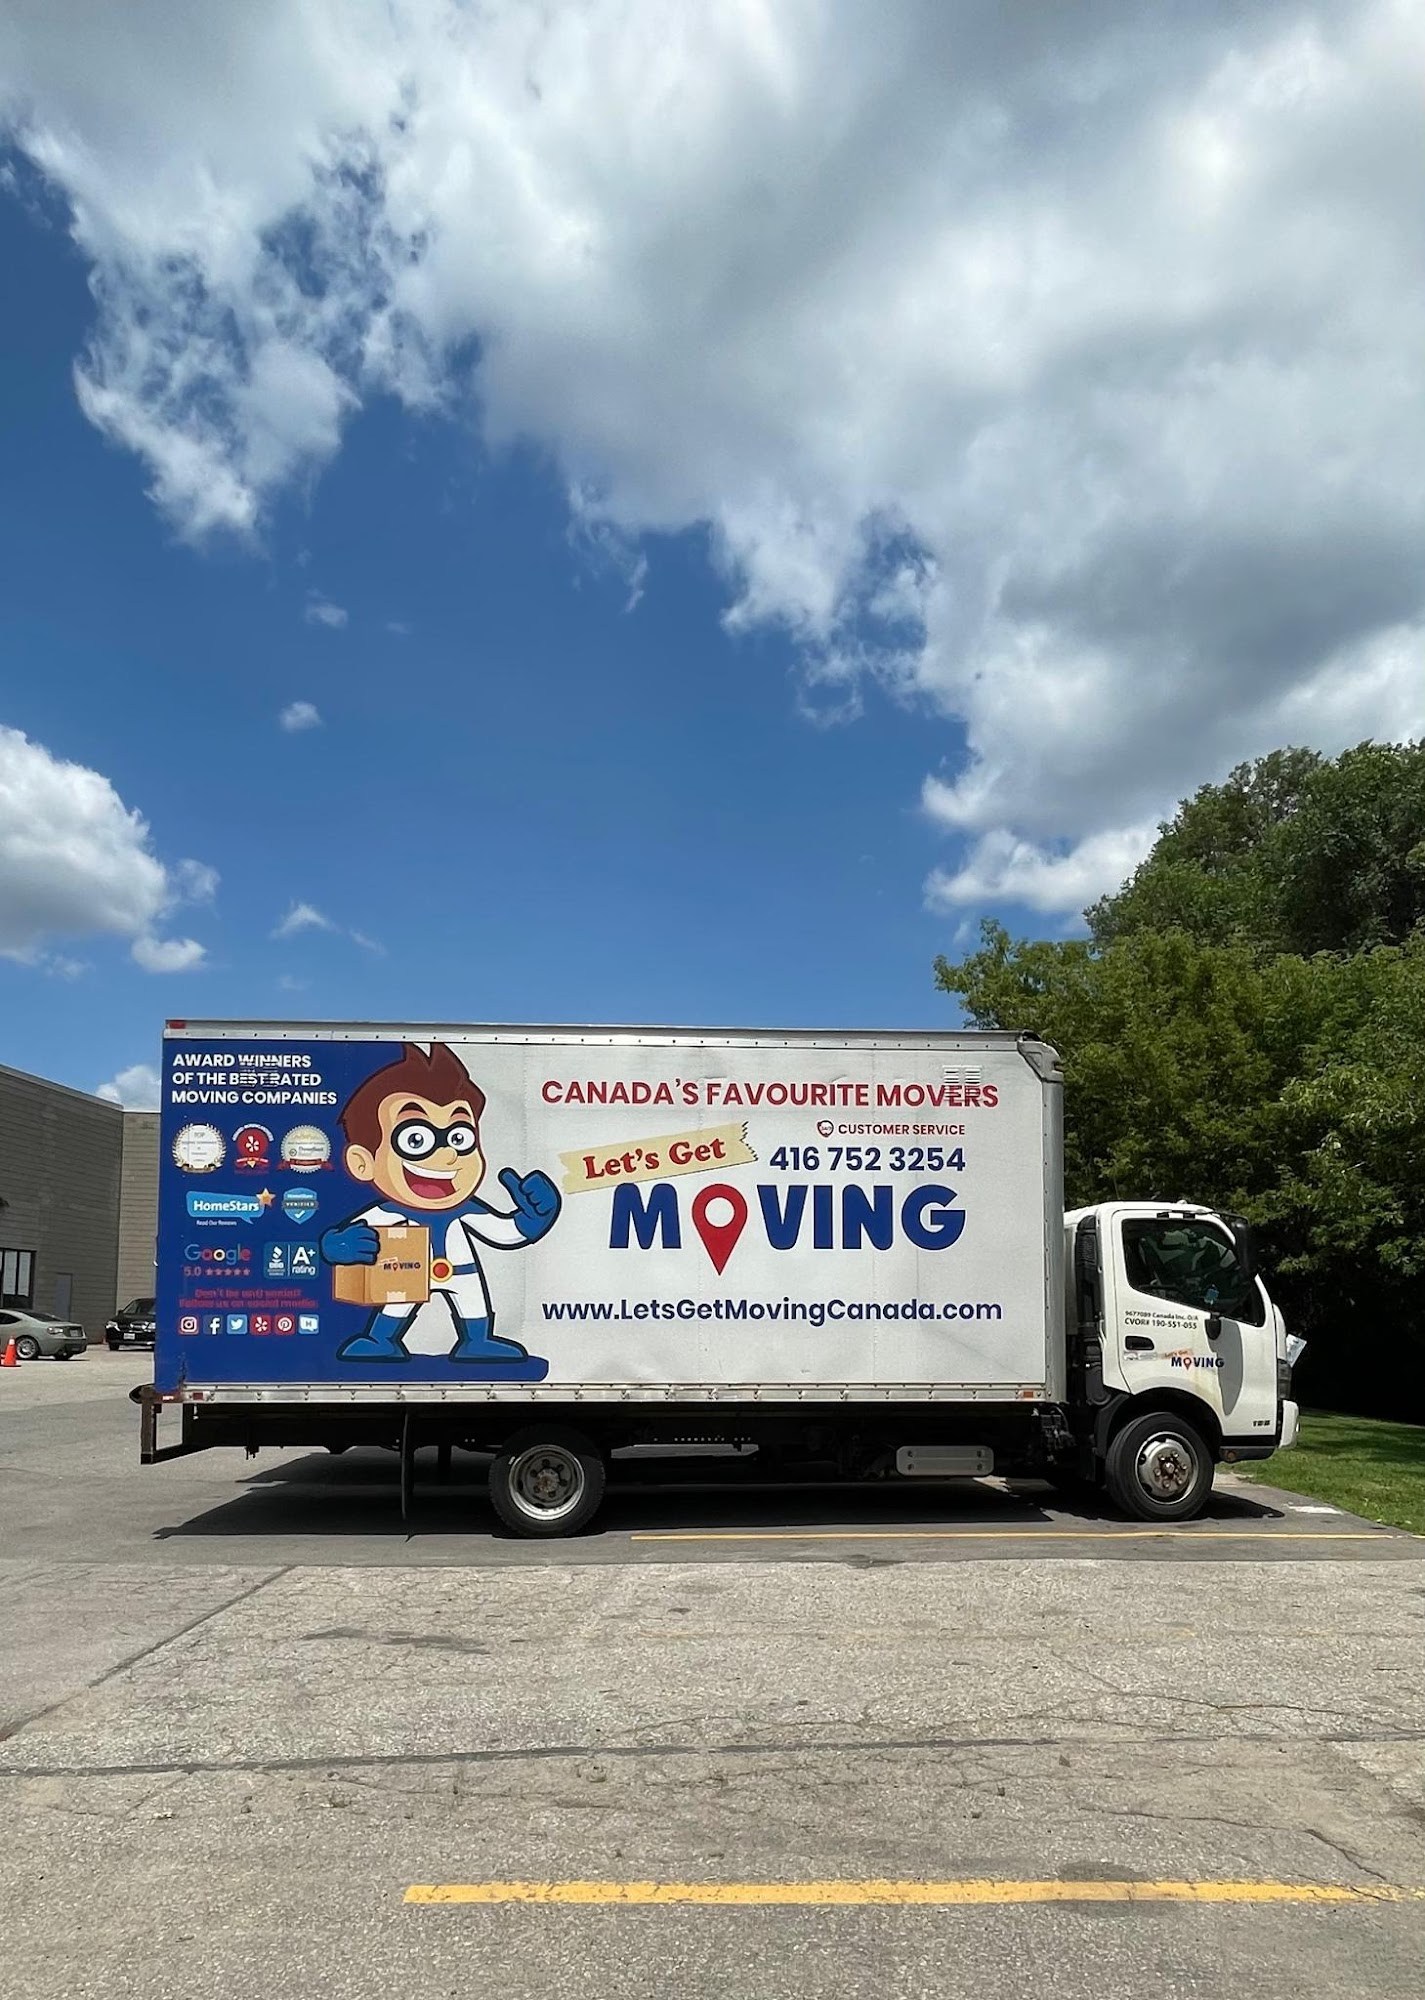 Let's Get Moving - Ajax Movers